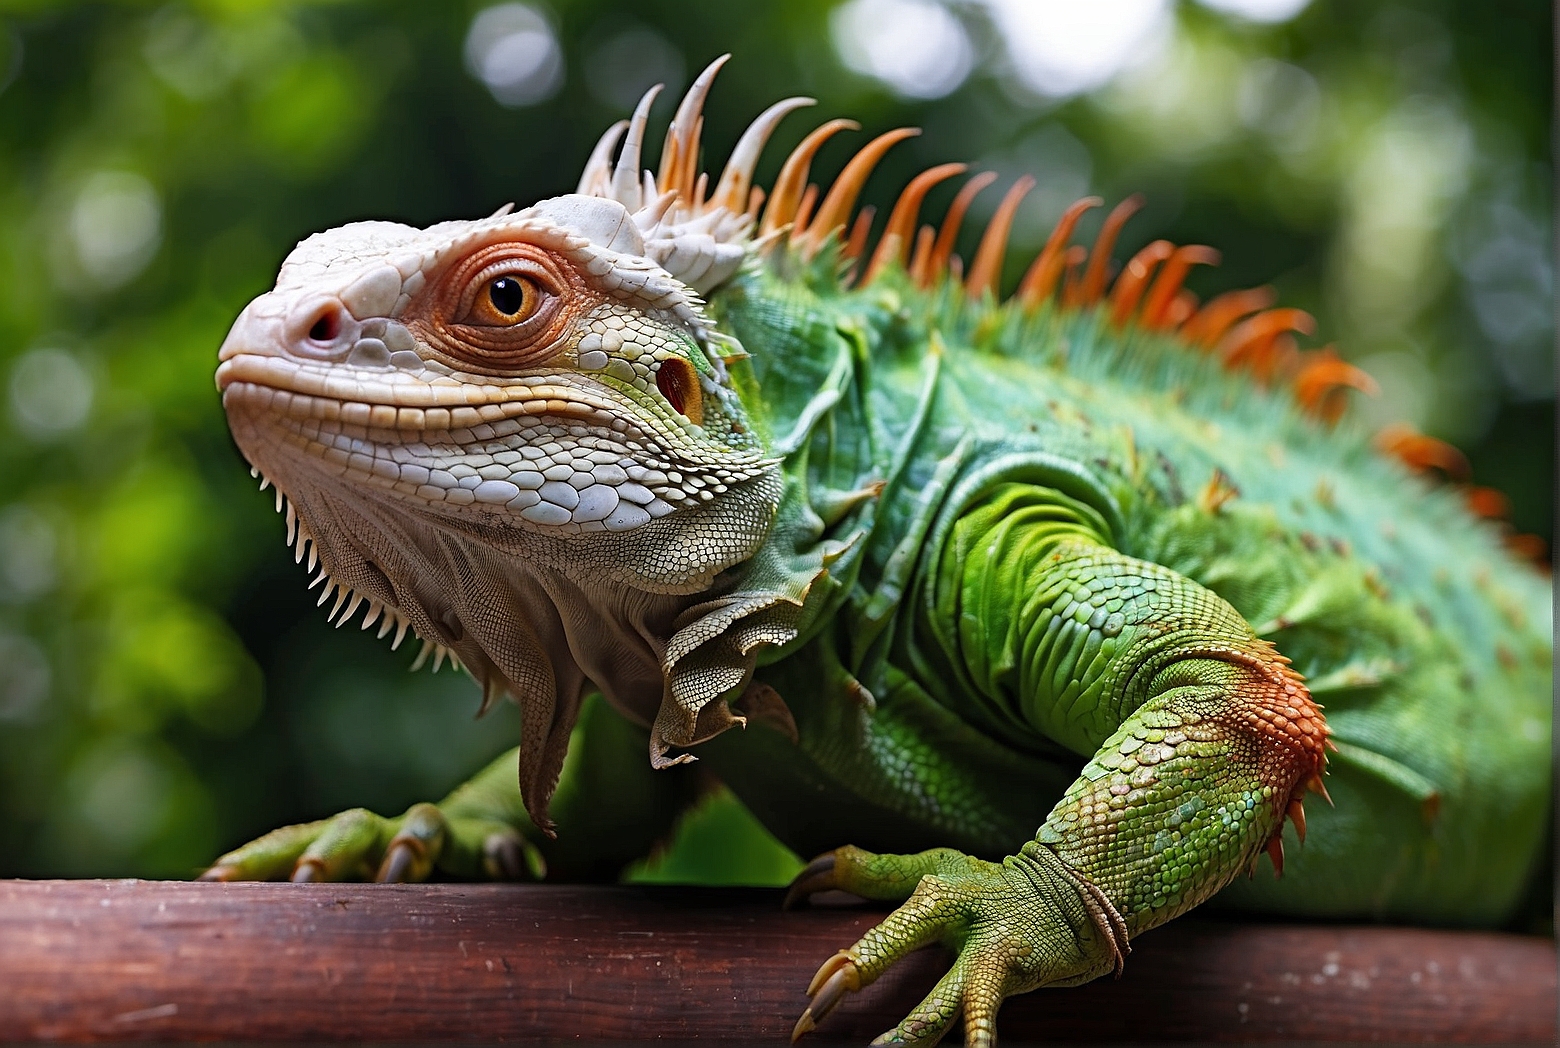 The Ultimate Guide: Taking Care of Green Iguanas